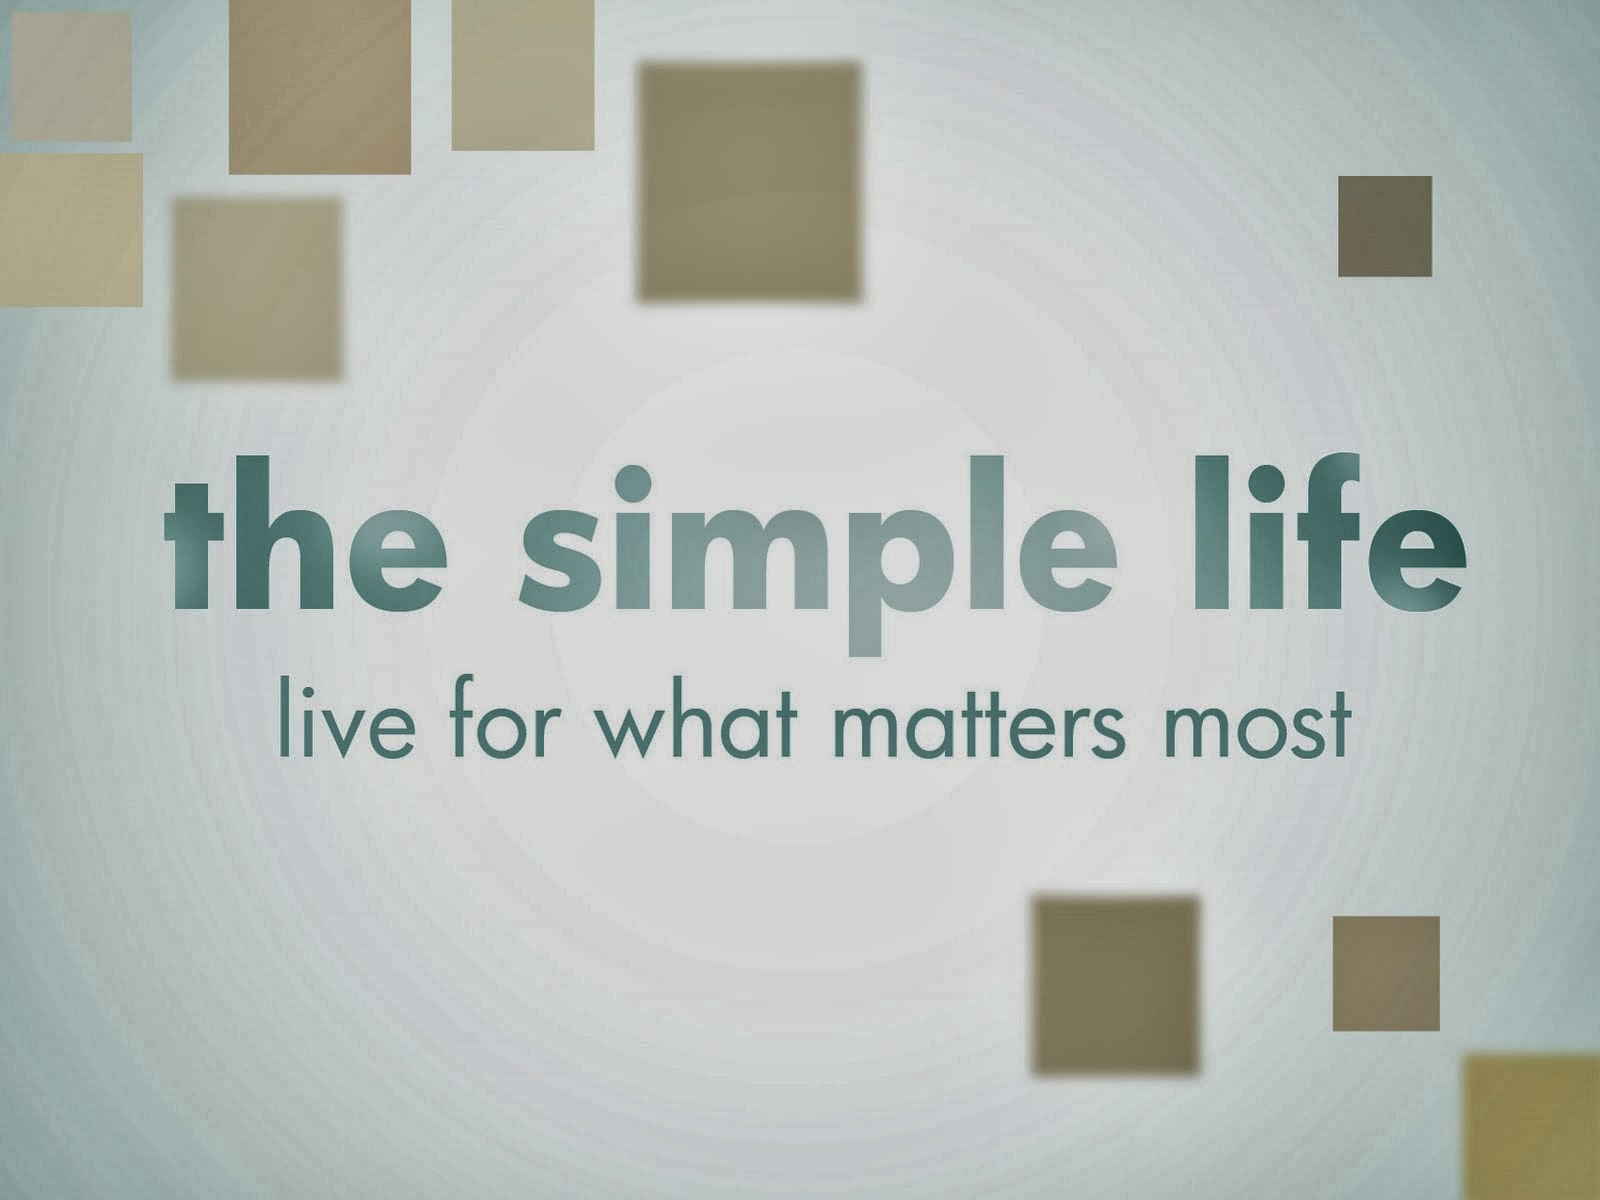 Simply life. Simple Life. Simple Life авторы. Simple Life перевод. Life's simple 7.